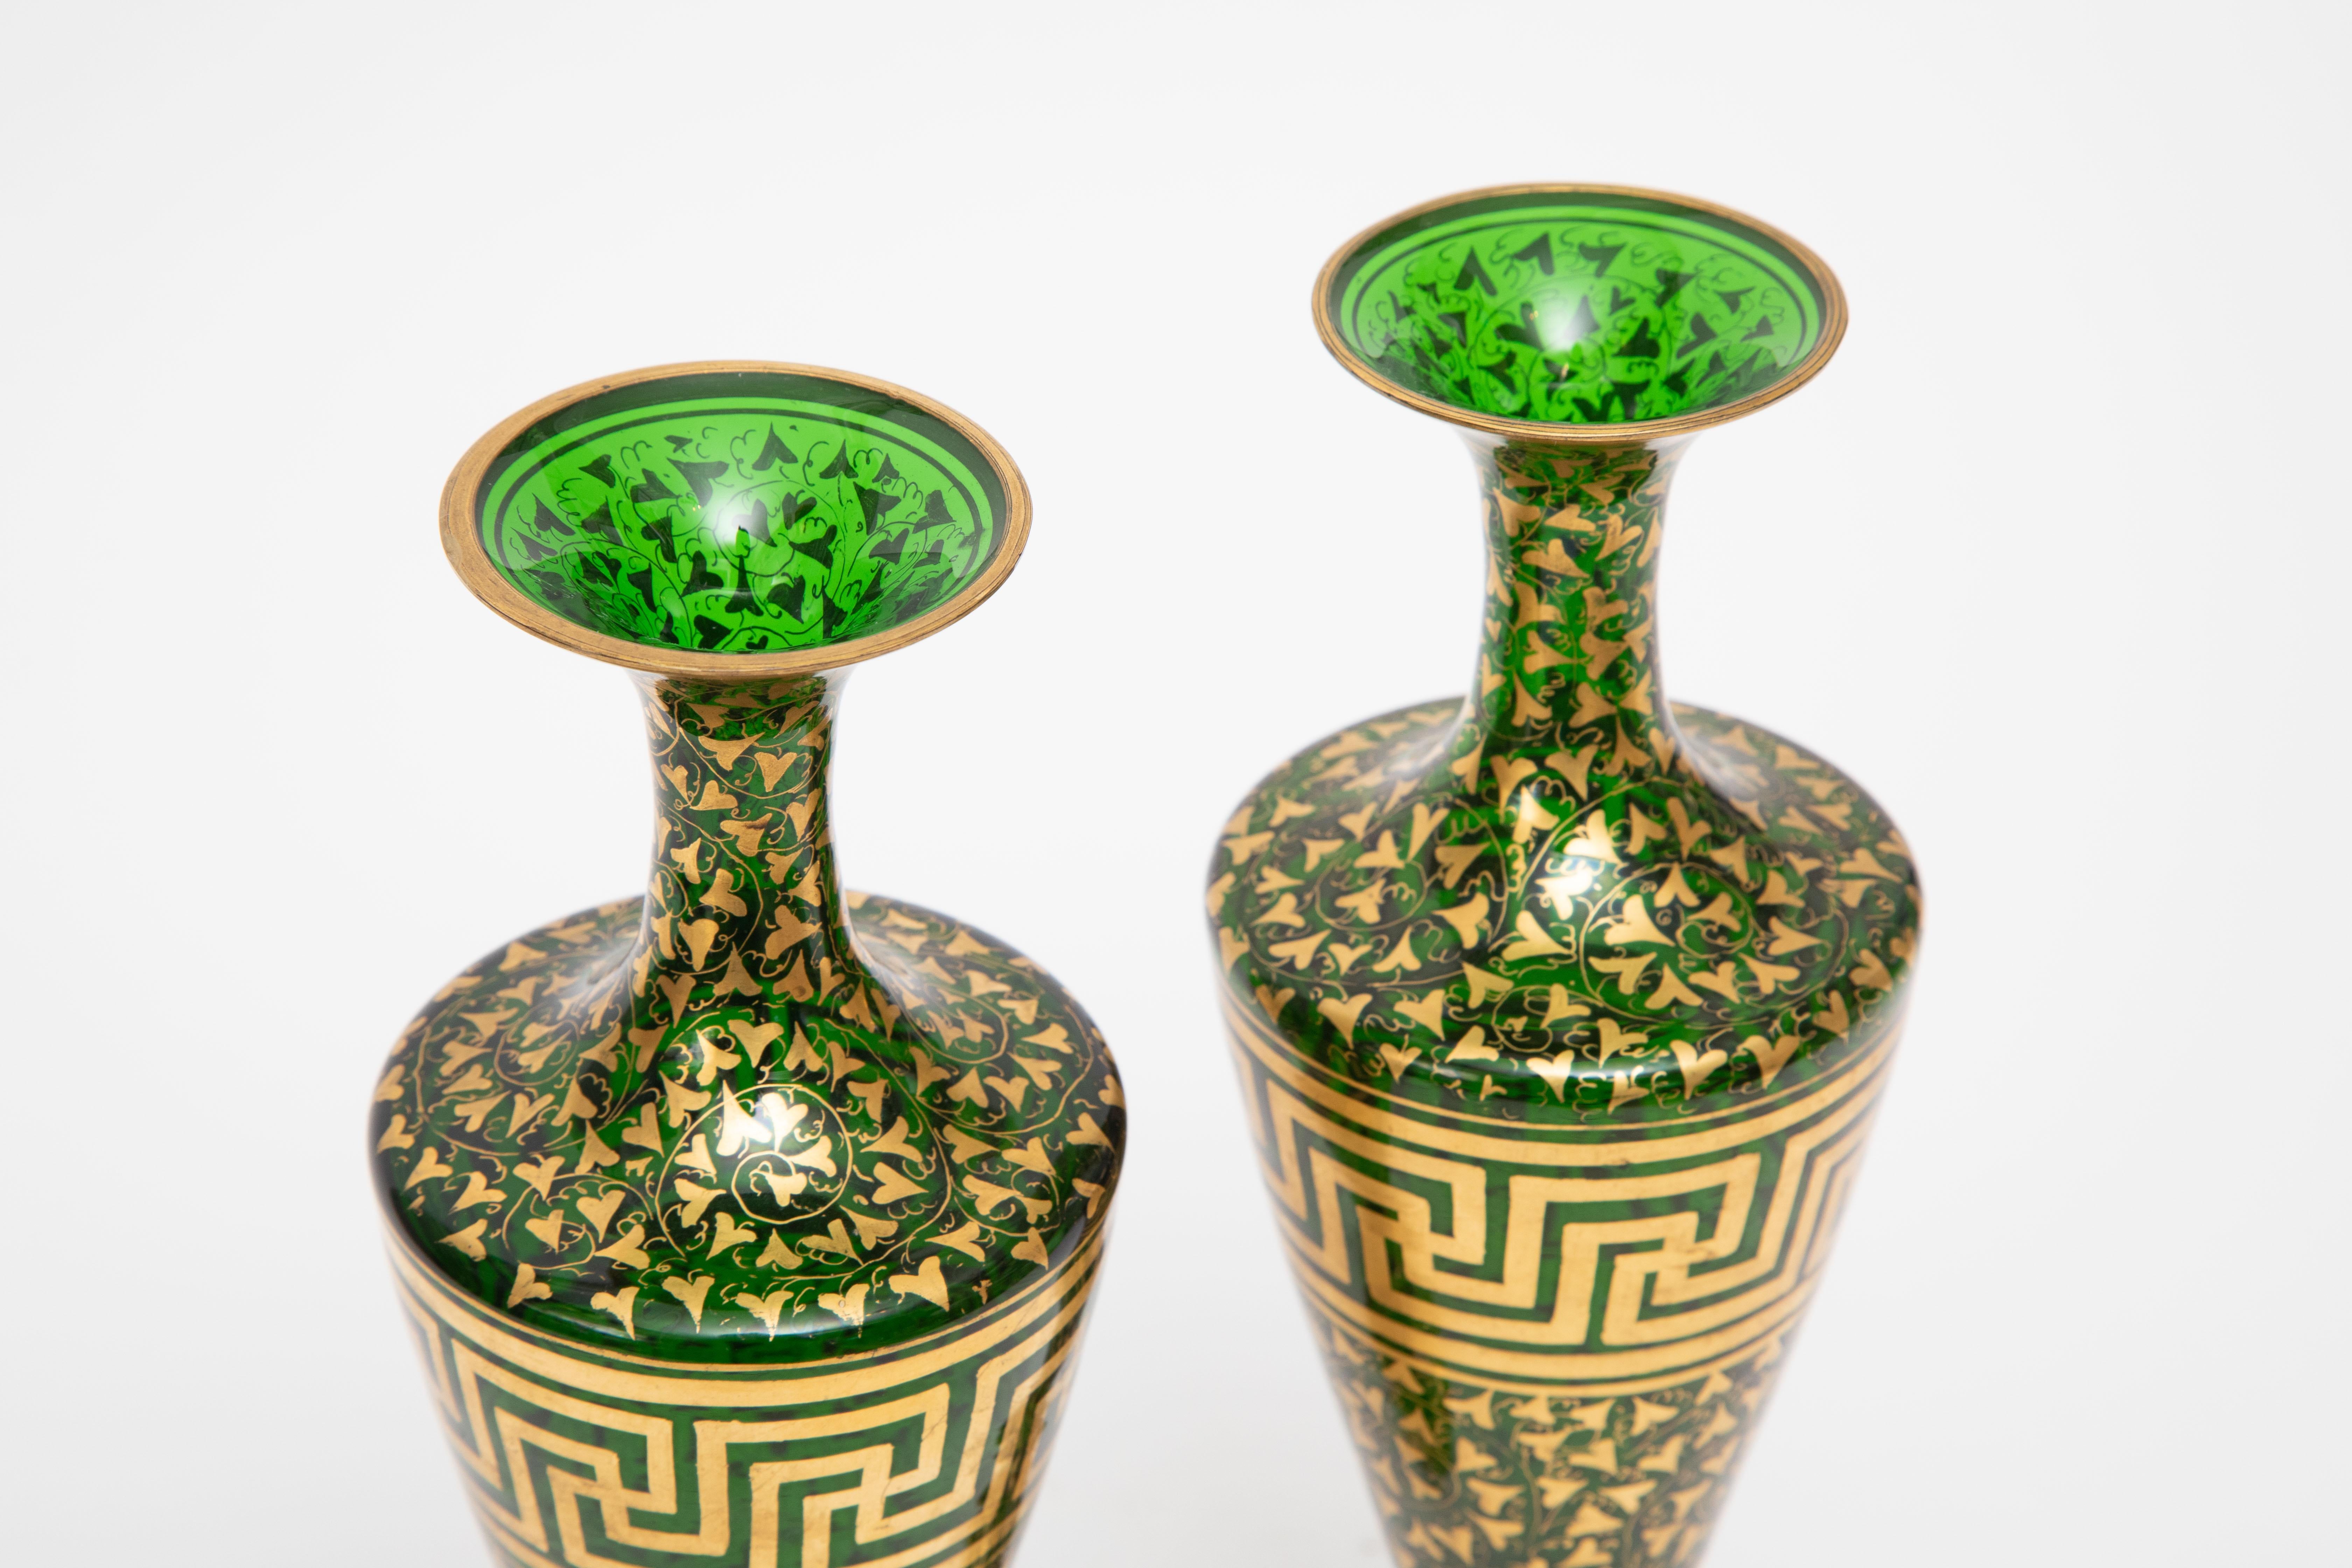 Rich green blown crystal vases featuring 24 karat gold decoration throughout with the central portion having a Greek key design. This pair dates to the last half of the 19th century and we attribute the craftsmanship to Moser. Elongated necks and a